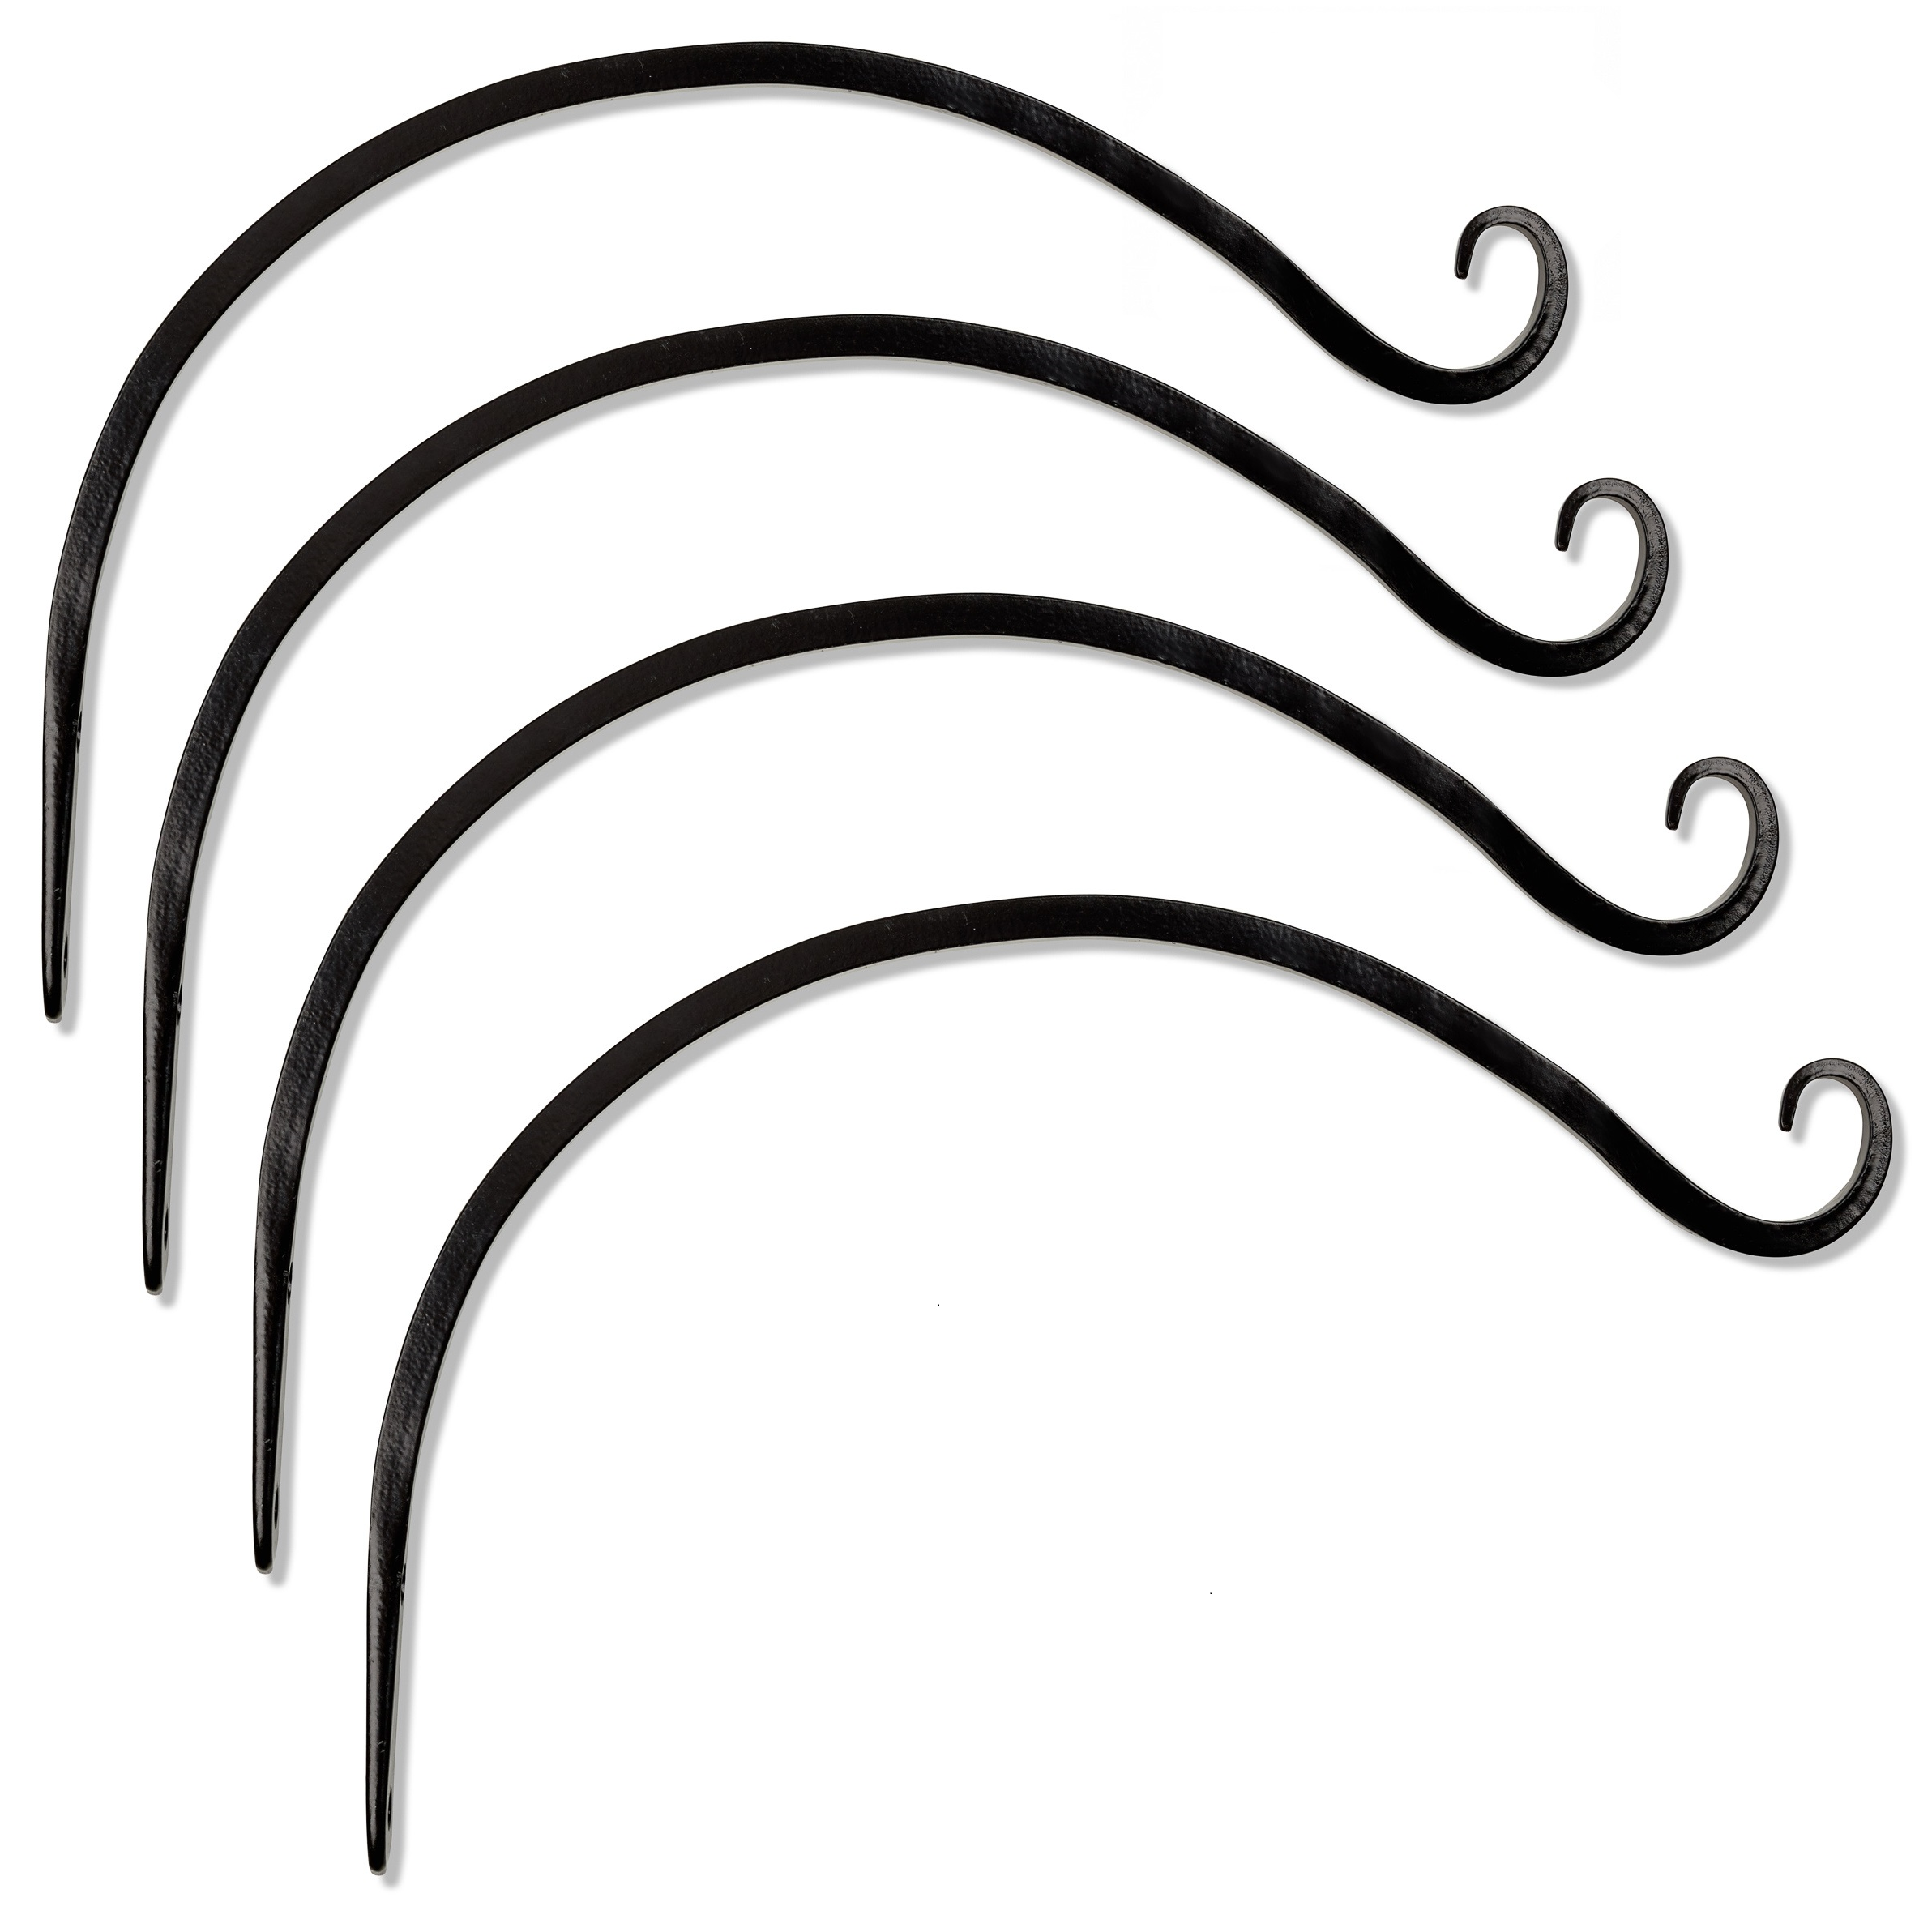 GrayBunny GB-6836 Fancy Curved Hook Set of 2 Black Cast Iron Wall Hooks For Bird Feeders Planters Lanterns Wind Chimes As Wall Brackets and More! 